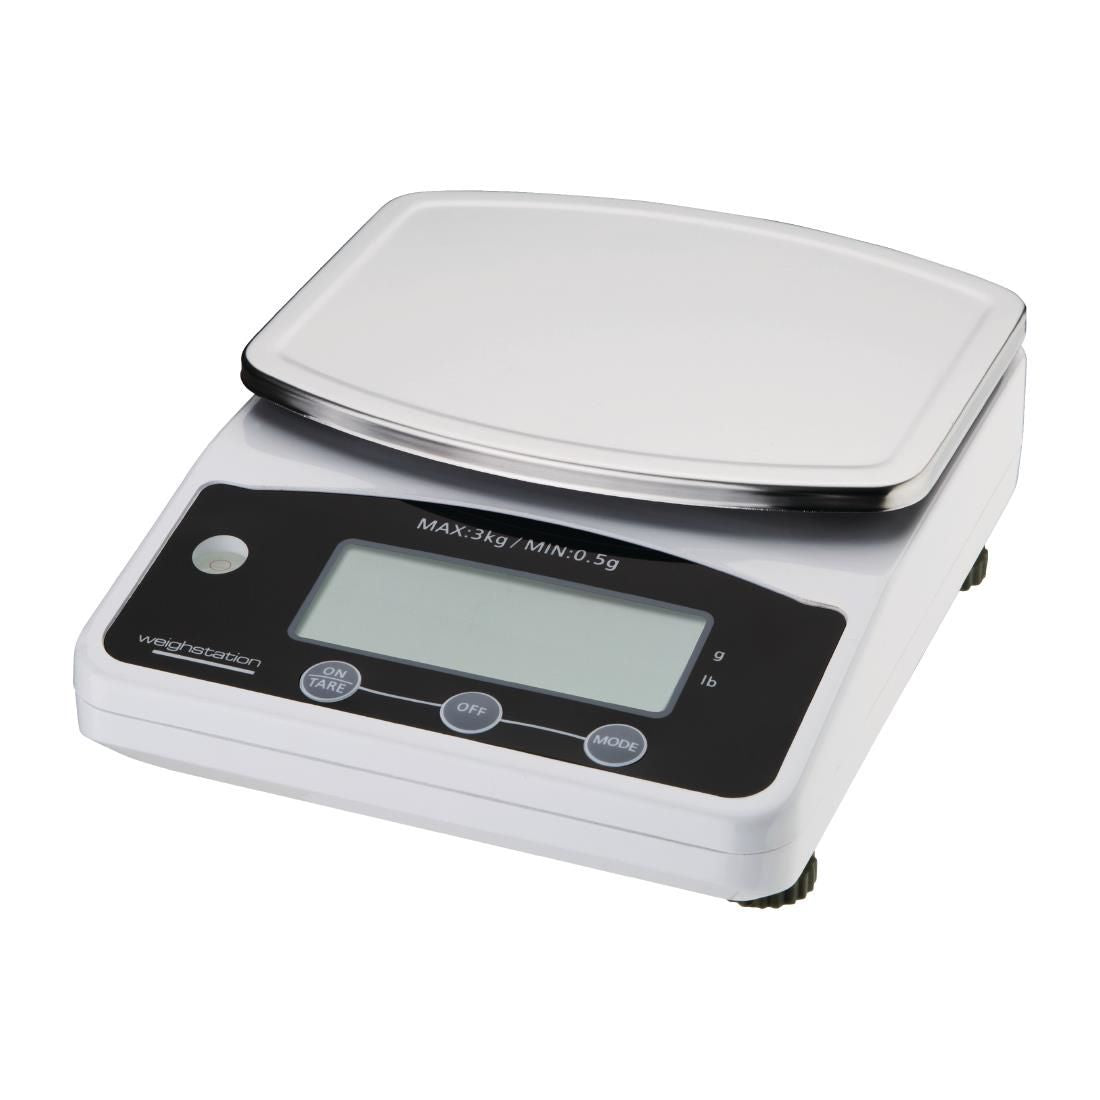 F201 Weighstation Electronic Platform Scale 3kg JD Catering Equipment Solutions Ltd